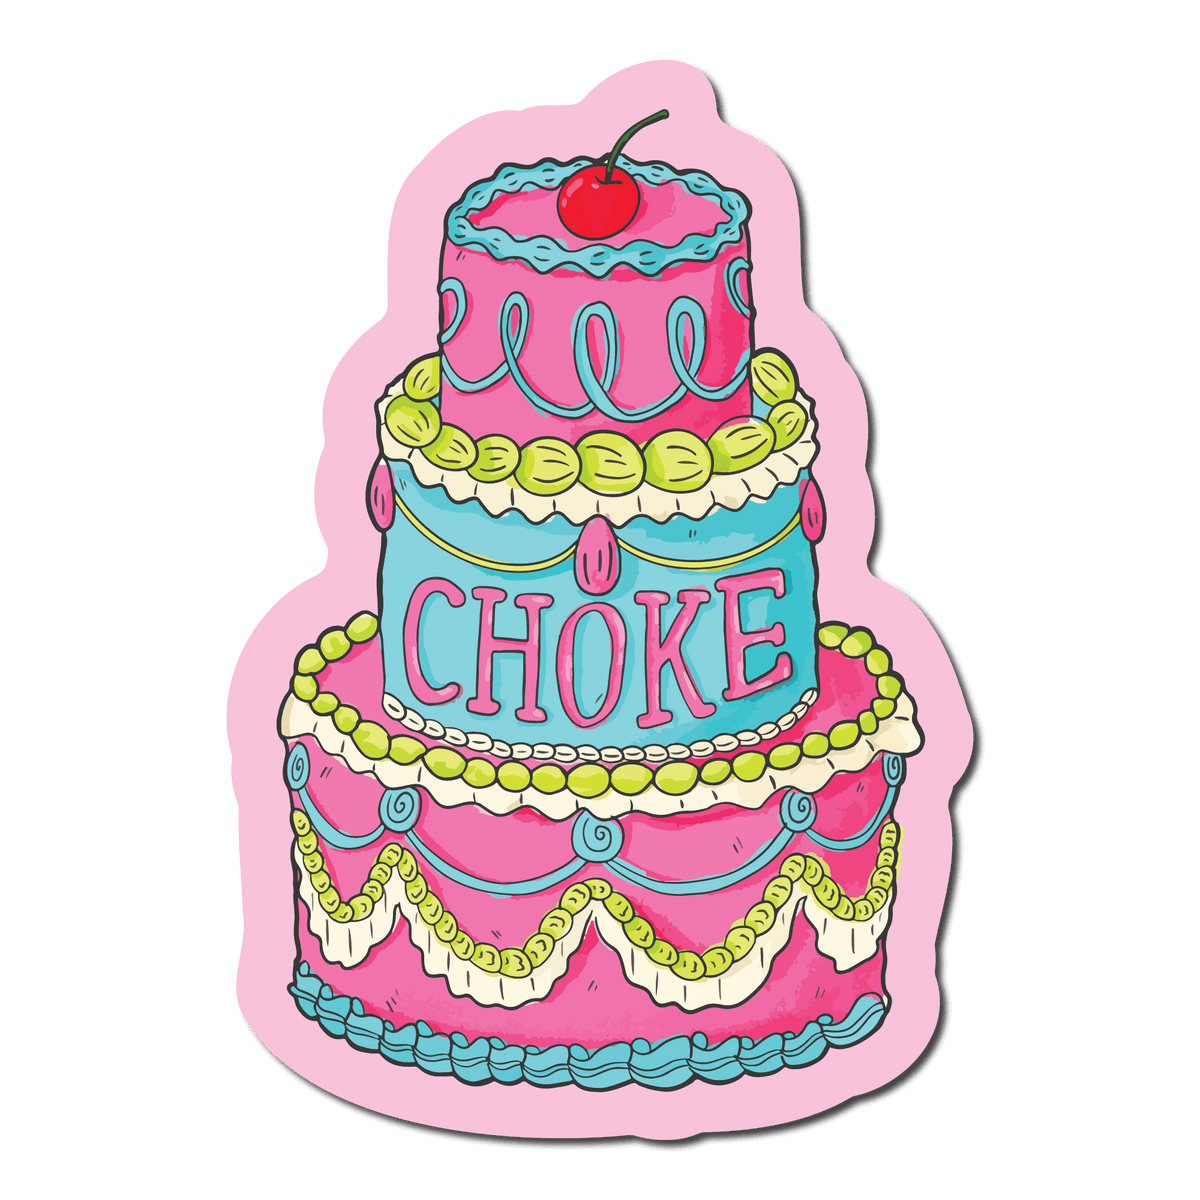 Small Sticker of a 3 tiered Cake that is pink and blue that has choke written on it